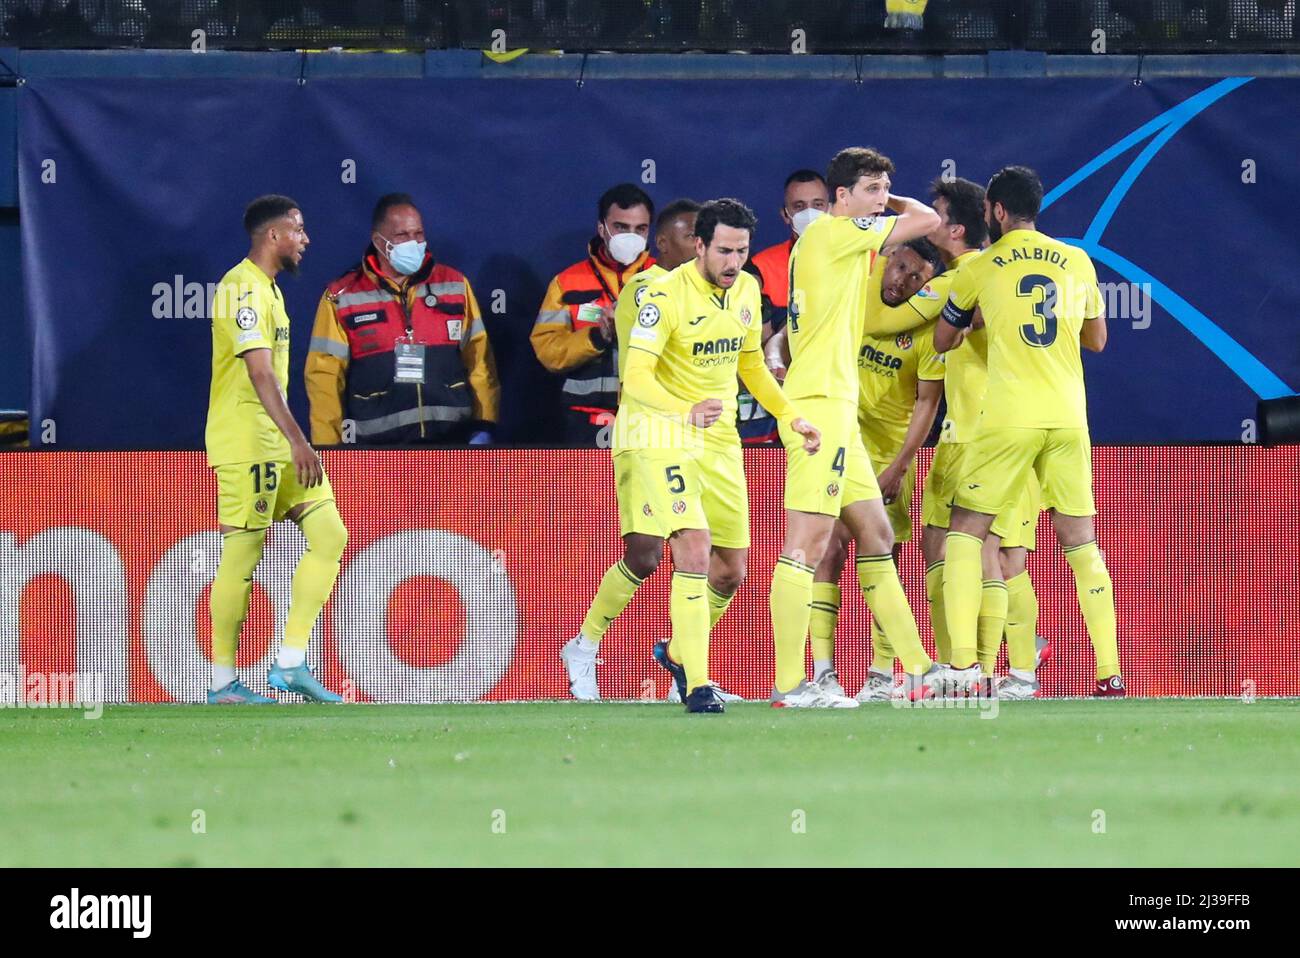 Byern Munich, April 06, 2022, Villareal cf players celebrating the goal of  Francis Coquelin (Villarreal CF) during the UEFA Champions League football  match Villarreal FC vs Byern Munich on April 06, 2022